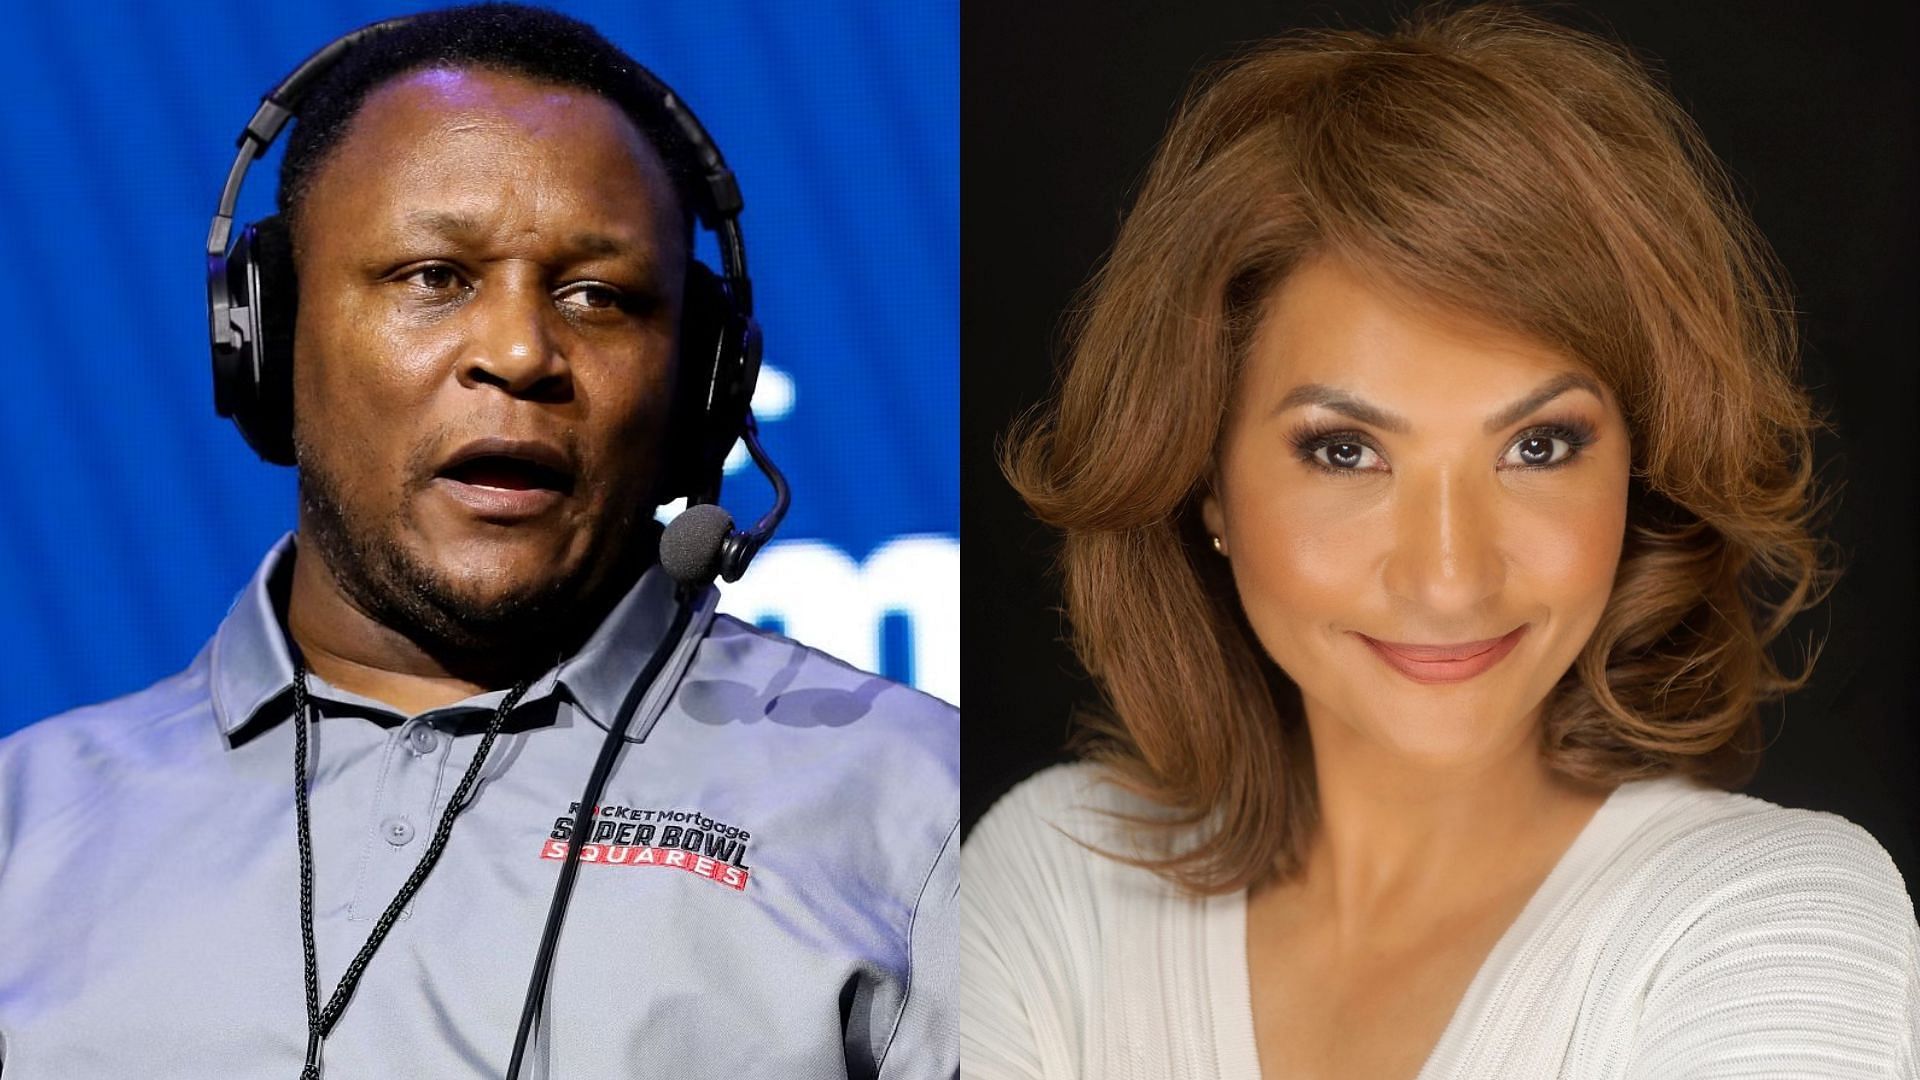 Pro Football Hall of Fame running back Barry Sanders filed for divorce from his wife, Lauren Campbell, on February 2012. (Image credit: Michigan Chronicle)